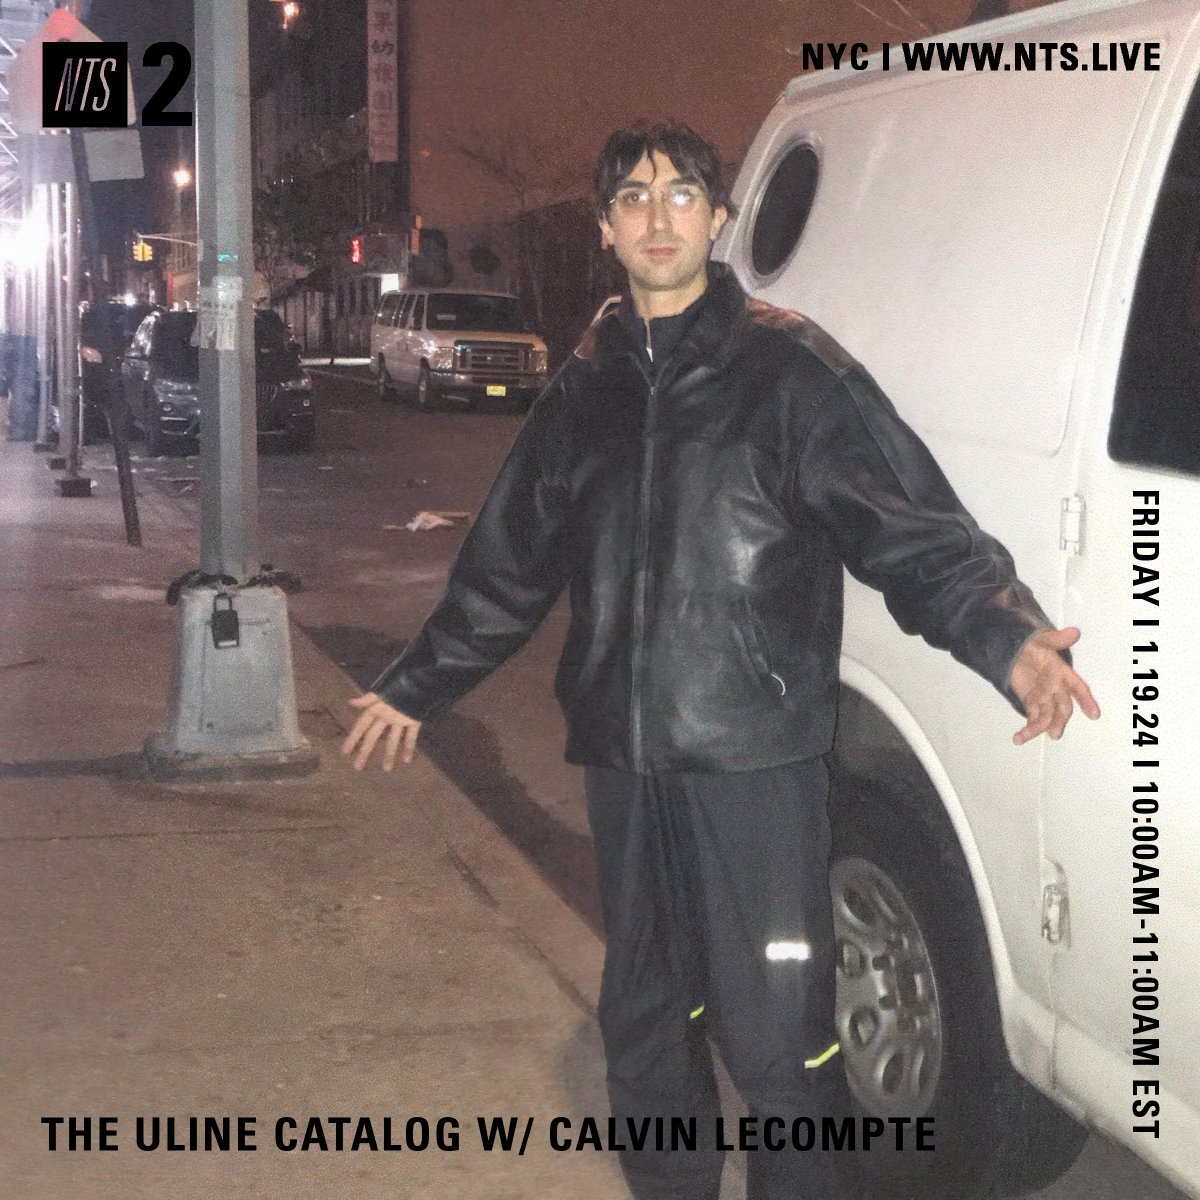 Into the Uline Catalog for the next hour, airing folk and vintage pop obscurities... listen now: nts.live/2